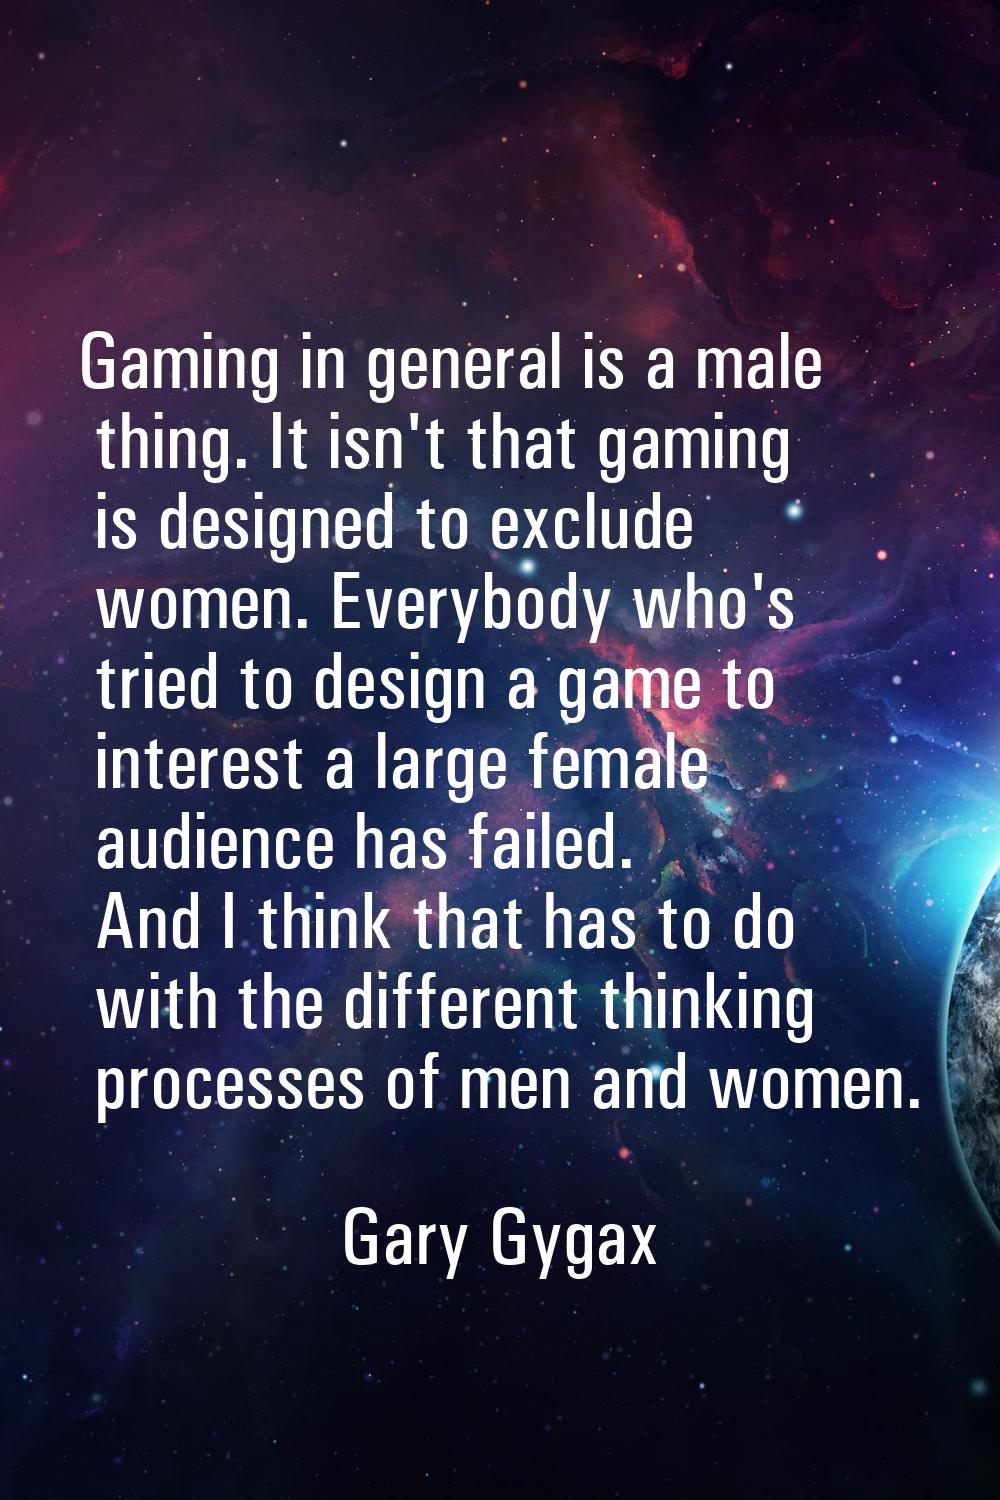 Gaming in general is a male thing. It isn't that gaming is designed to exclude women. Everybody who